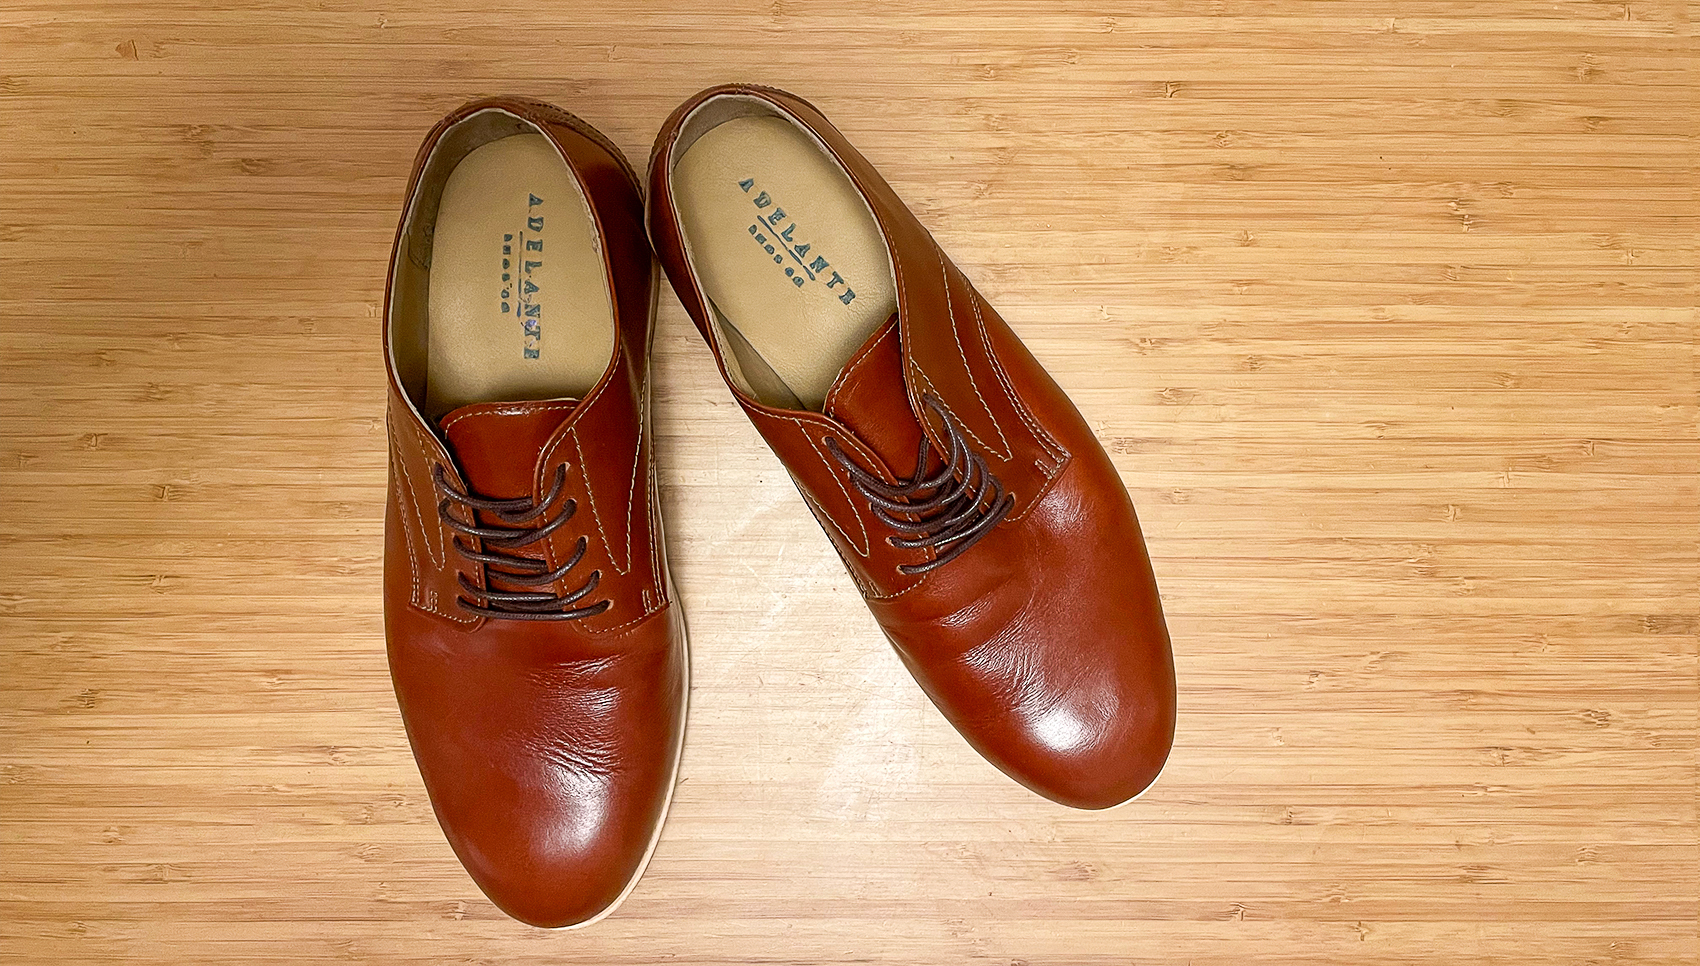 Adelante Dress Shoes for Wide Feet